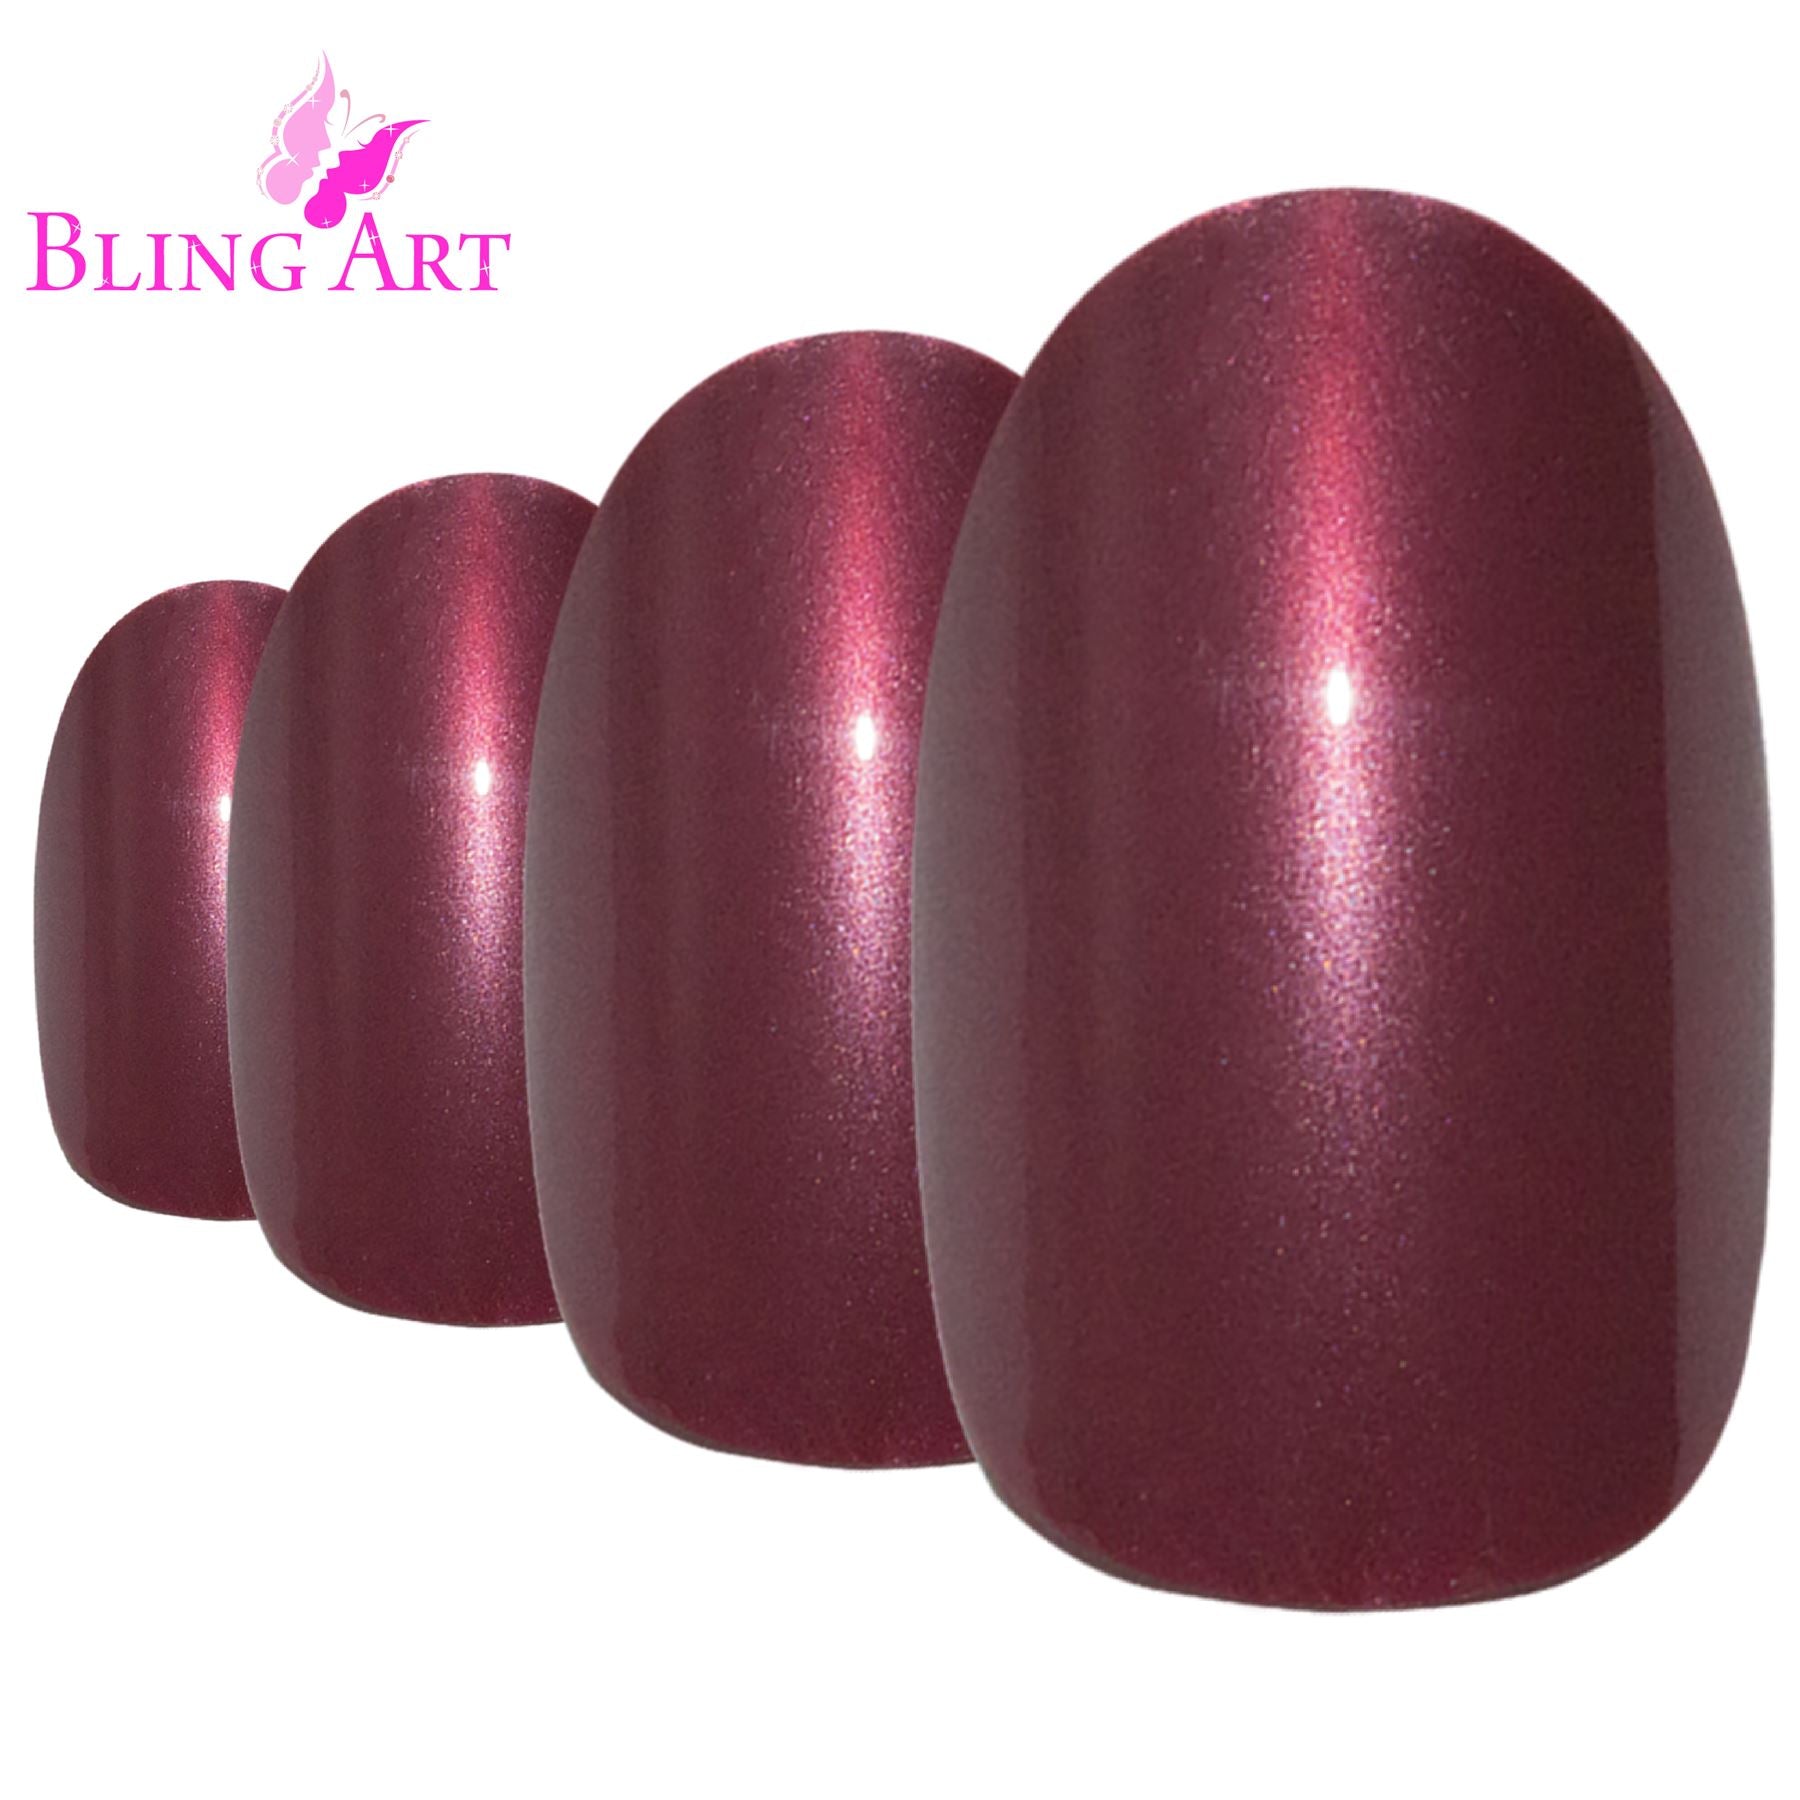 False Nails by Bling Art Red Brown Glitter Oval Medium  Acrylic Tips with Glue